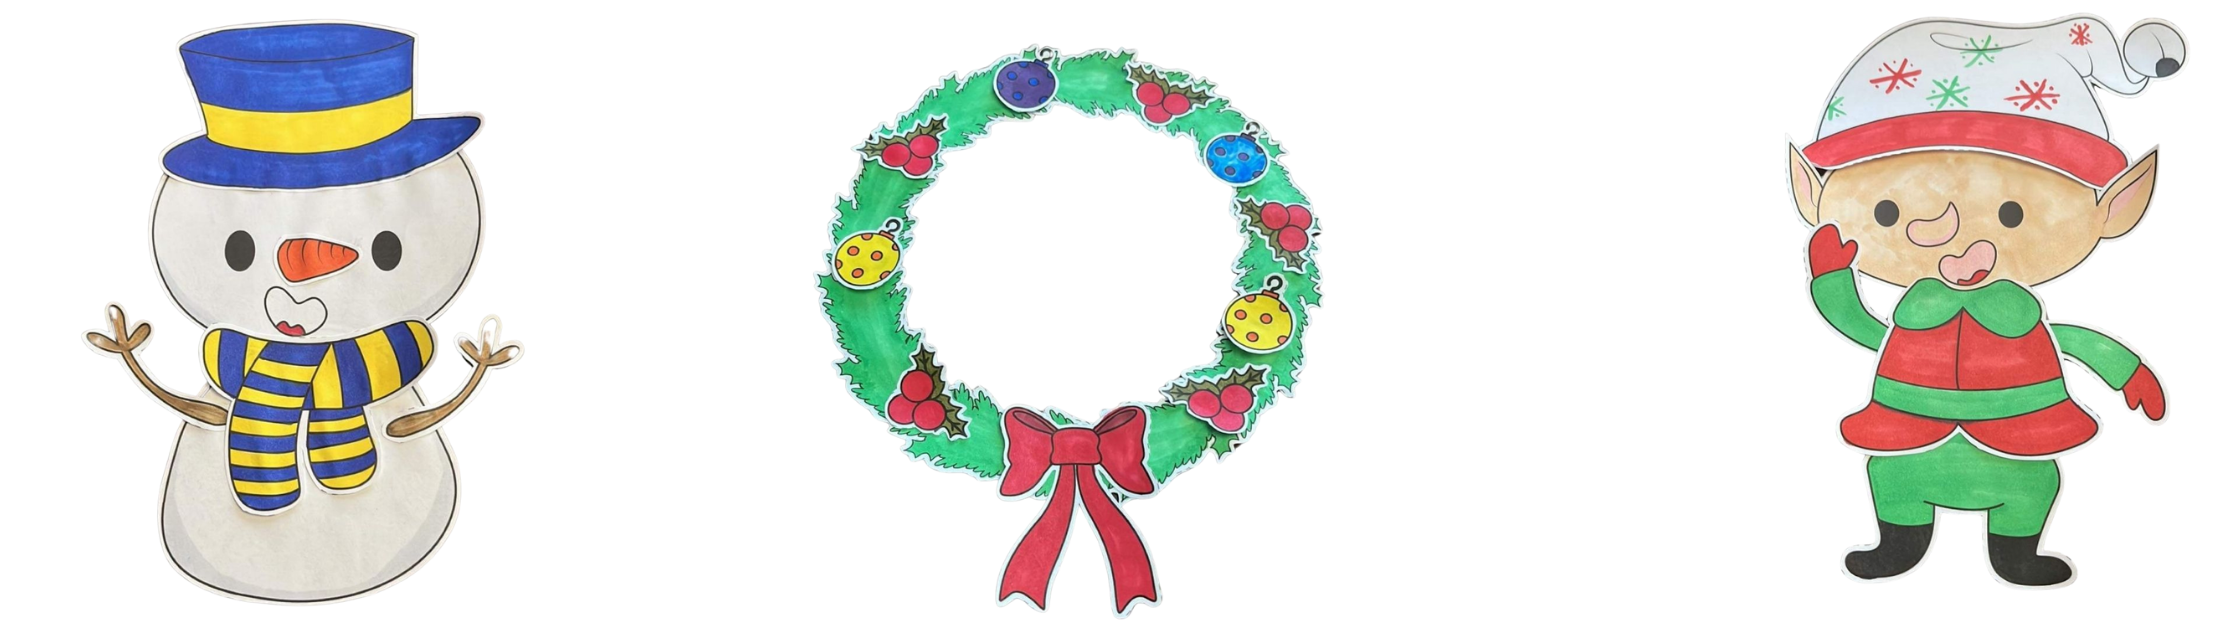 Free PDF download of printable Christmas crafts for kids